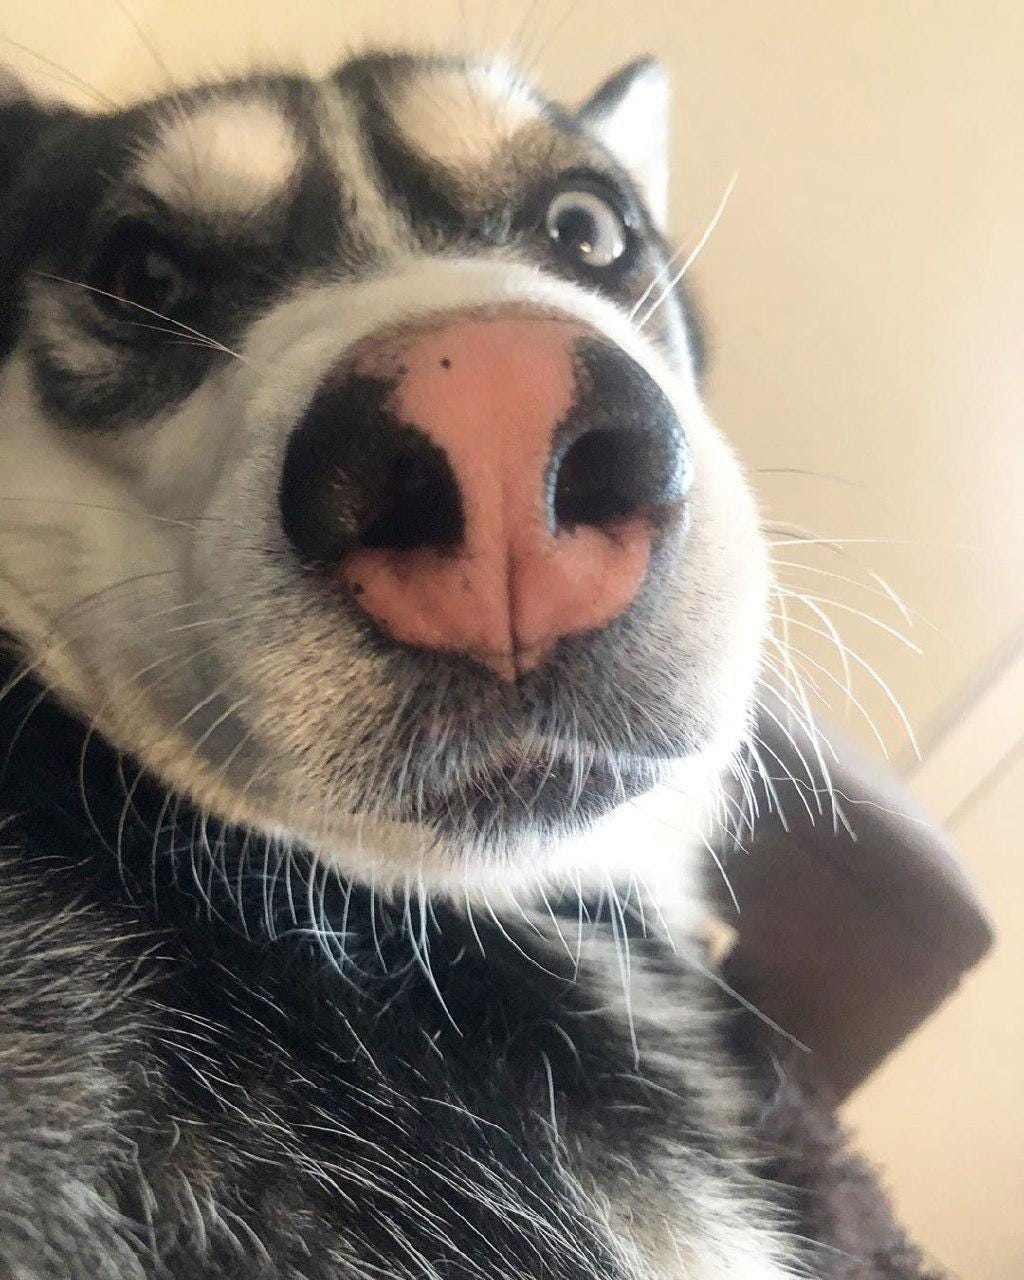 14 Adorable Photos Of Huskies That Will Make You Smile | Page 3 of 3 | PetPress